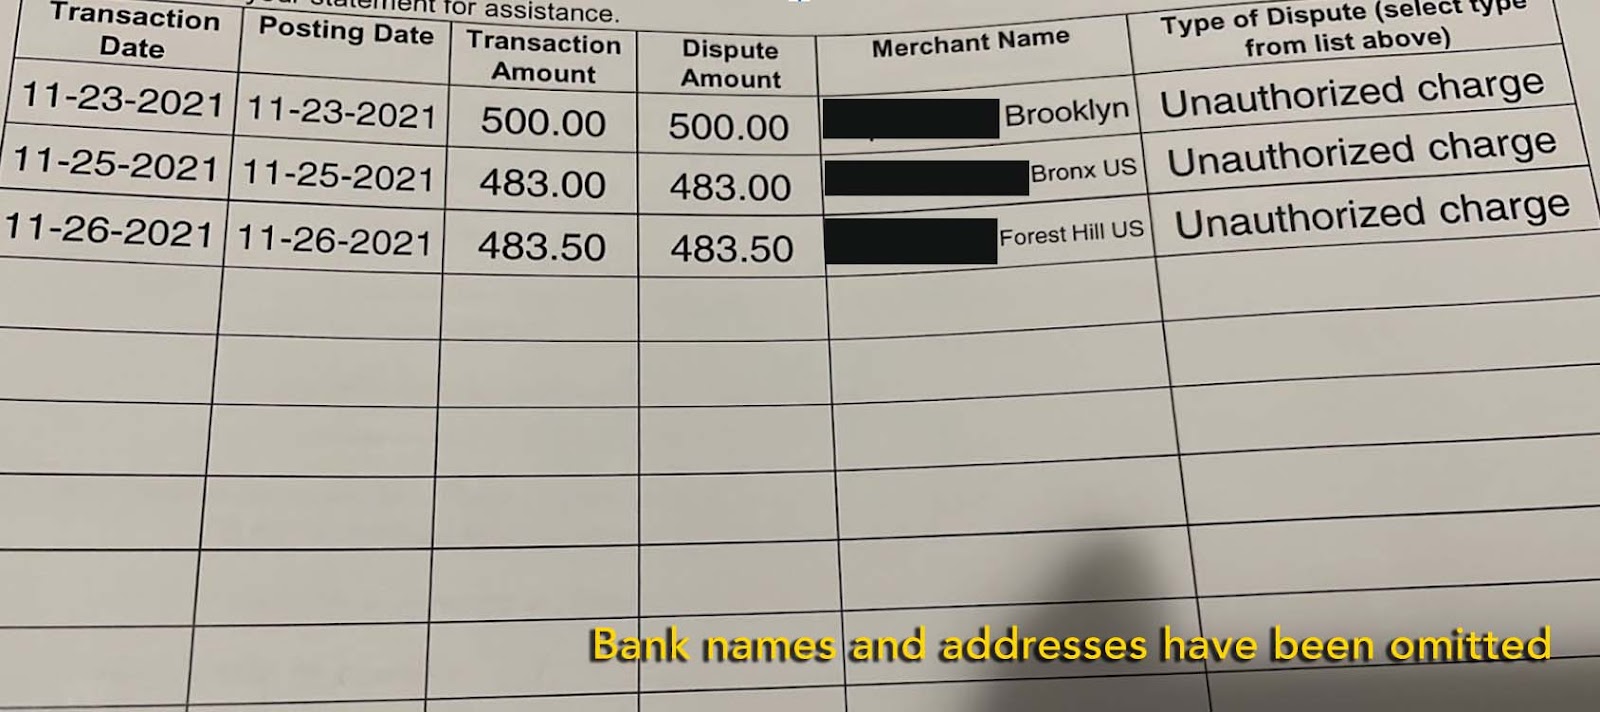 These are some of the unauthorized transactions that Diana disputed as card thefts